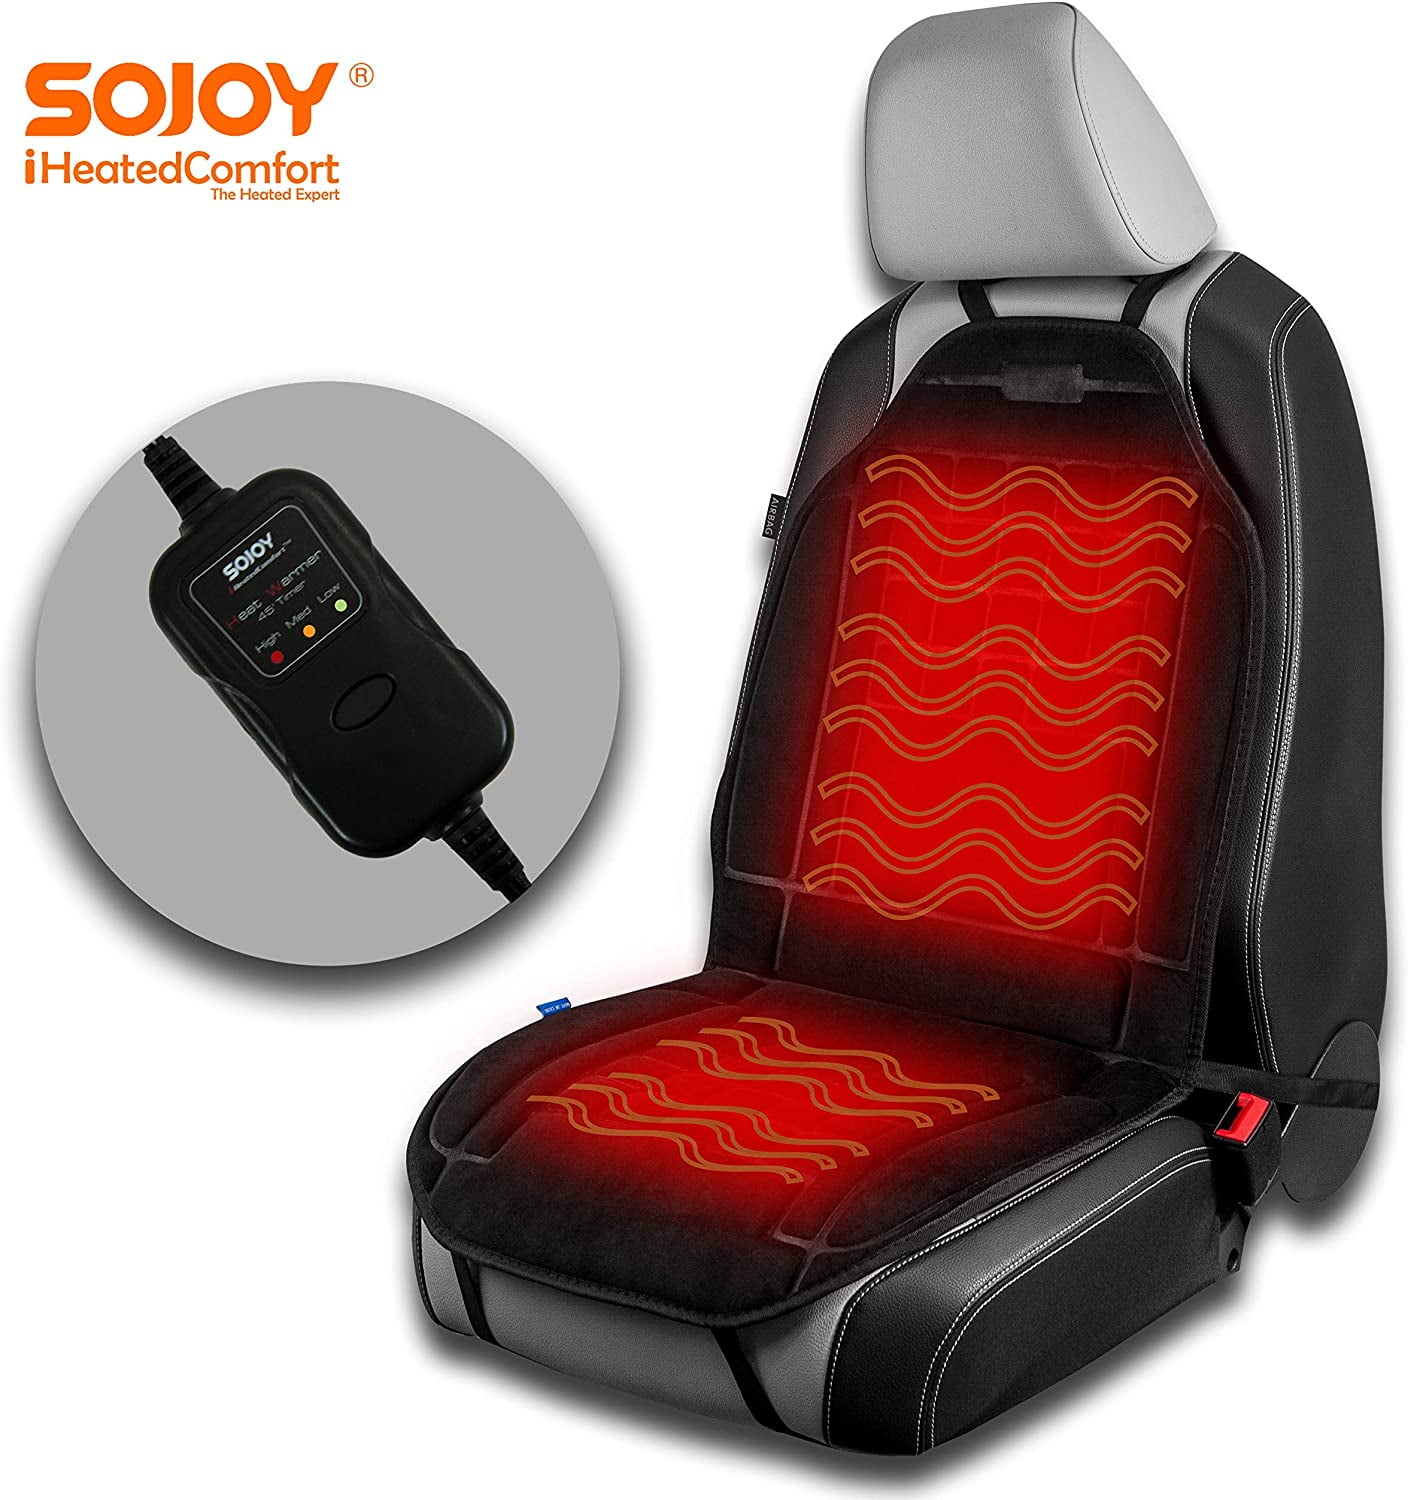 Sojoy Heated Car Seat Cushion-3 Fast Heating Pads with Auto Shut Off Timer-Car Seat Warmer Seat Heater for Cold Winter Days(Black) by Sojoy